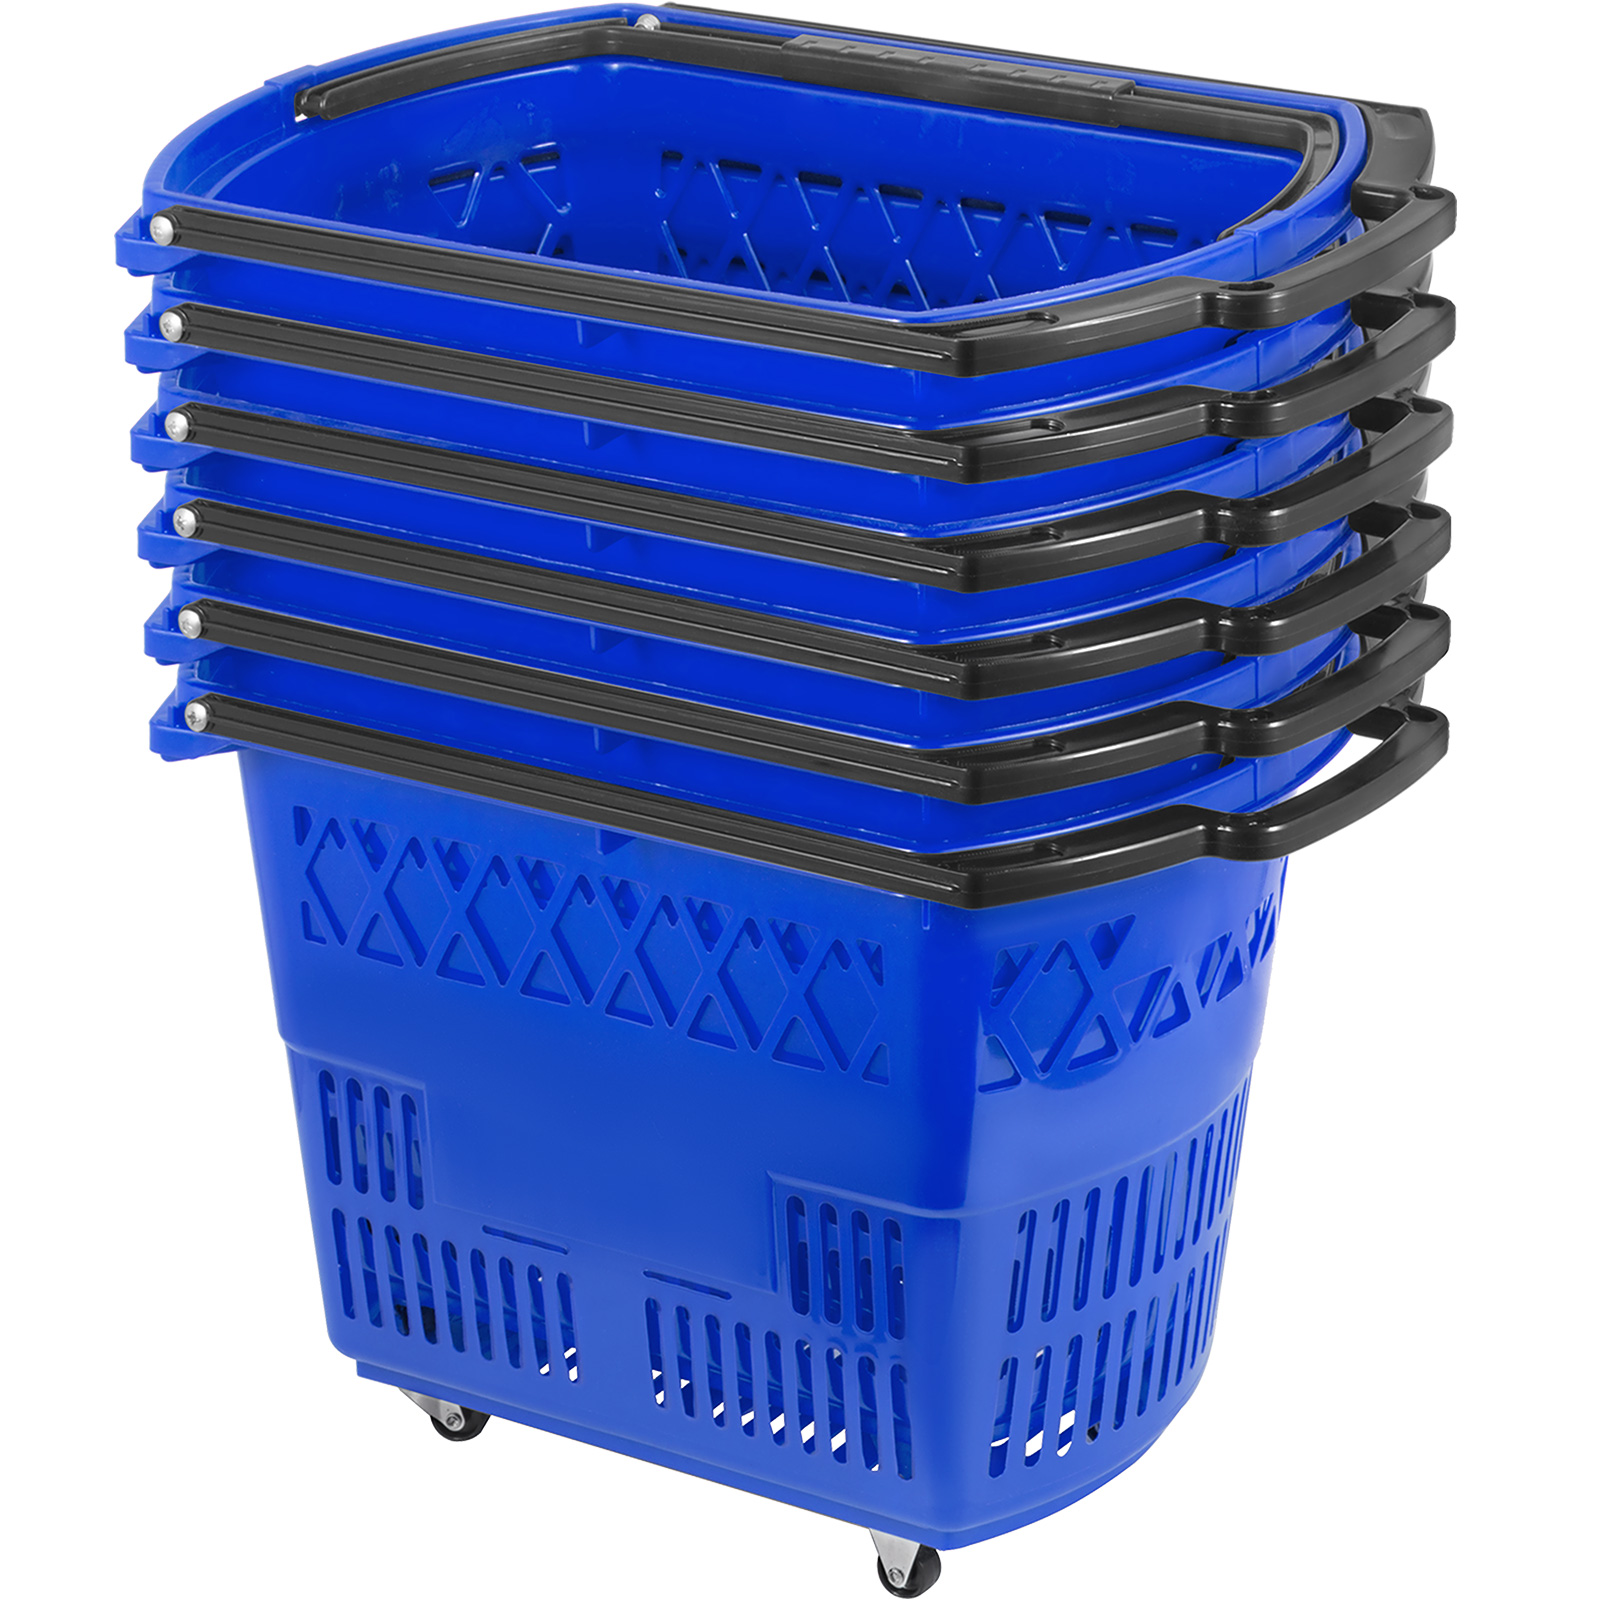 Shopping Baskets Plastic Baskets with 1 HANDLE/HANDLE NEW 